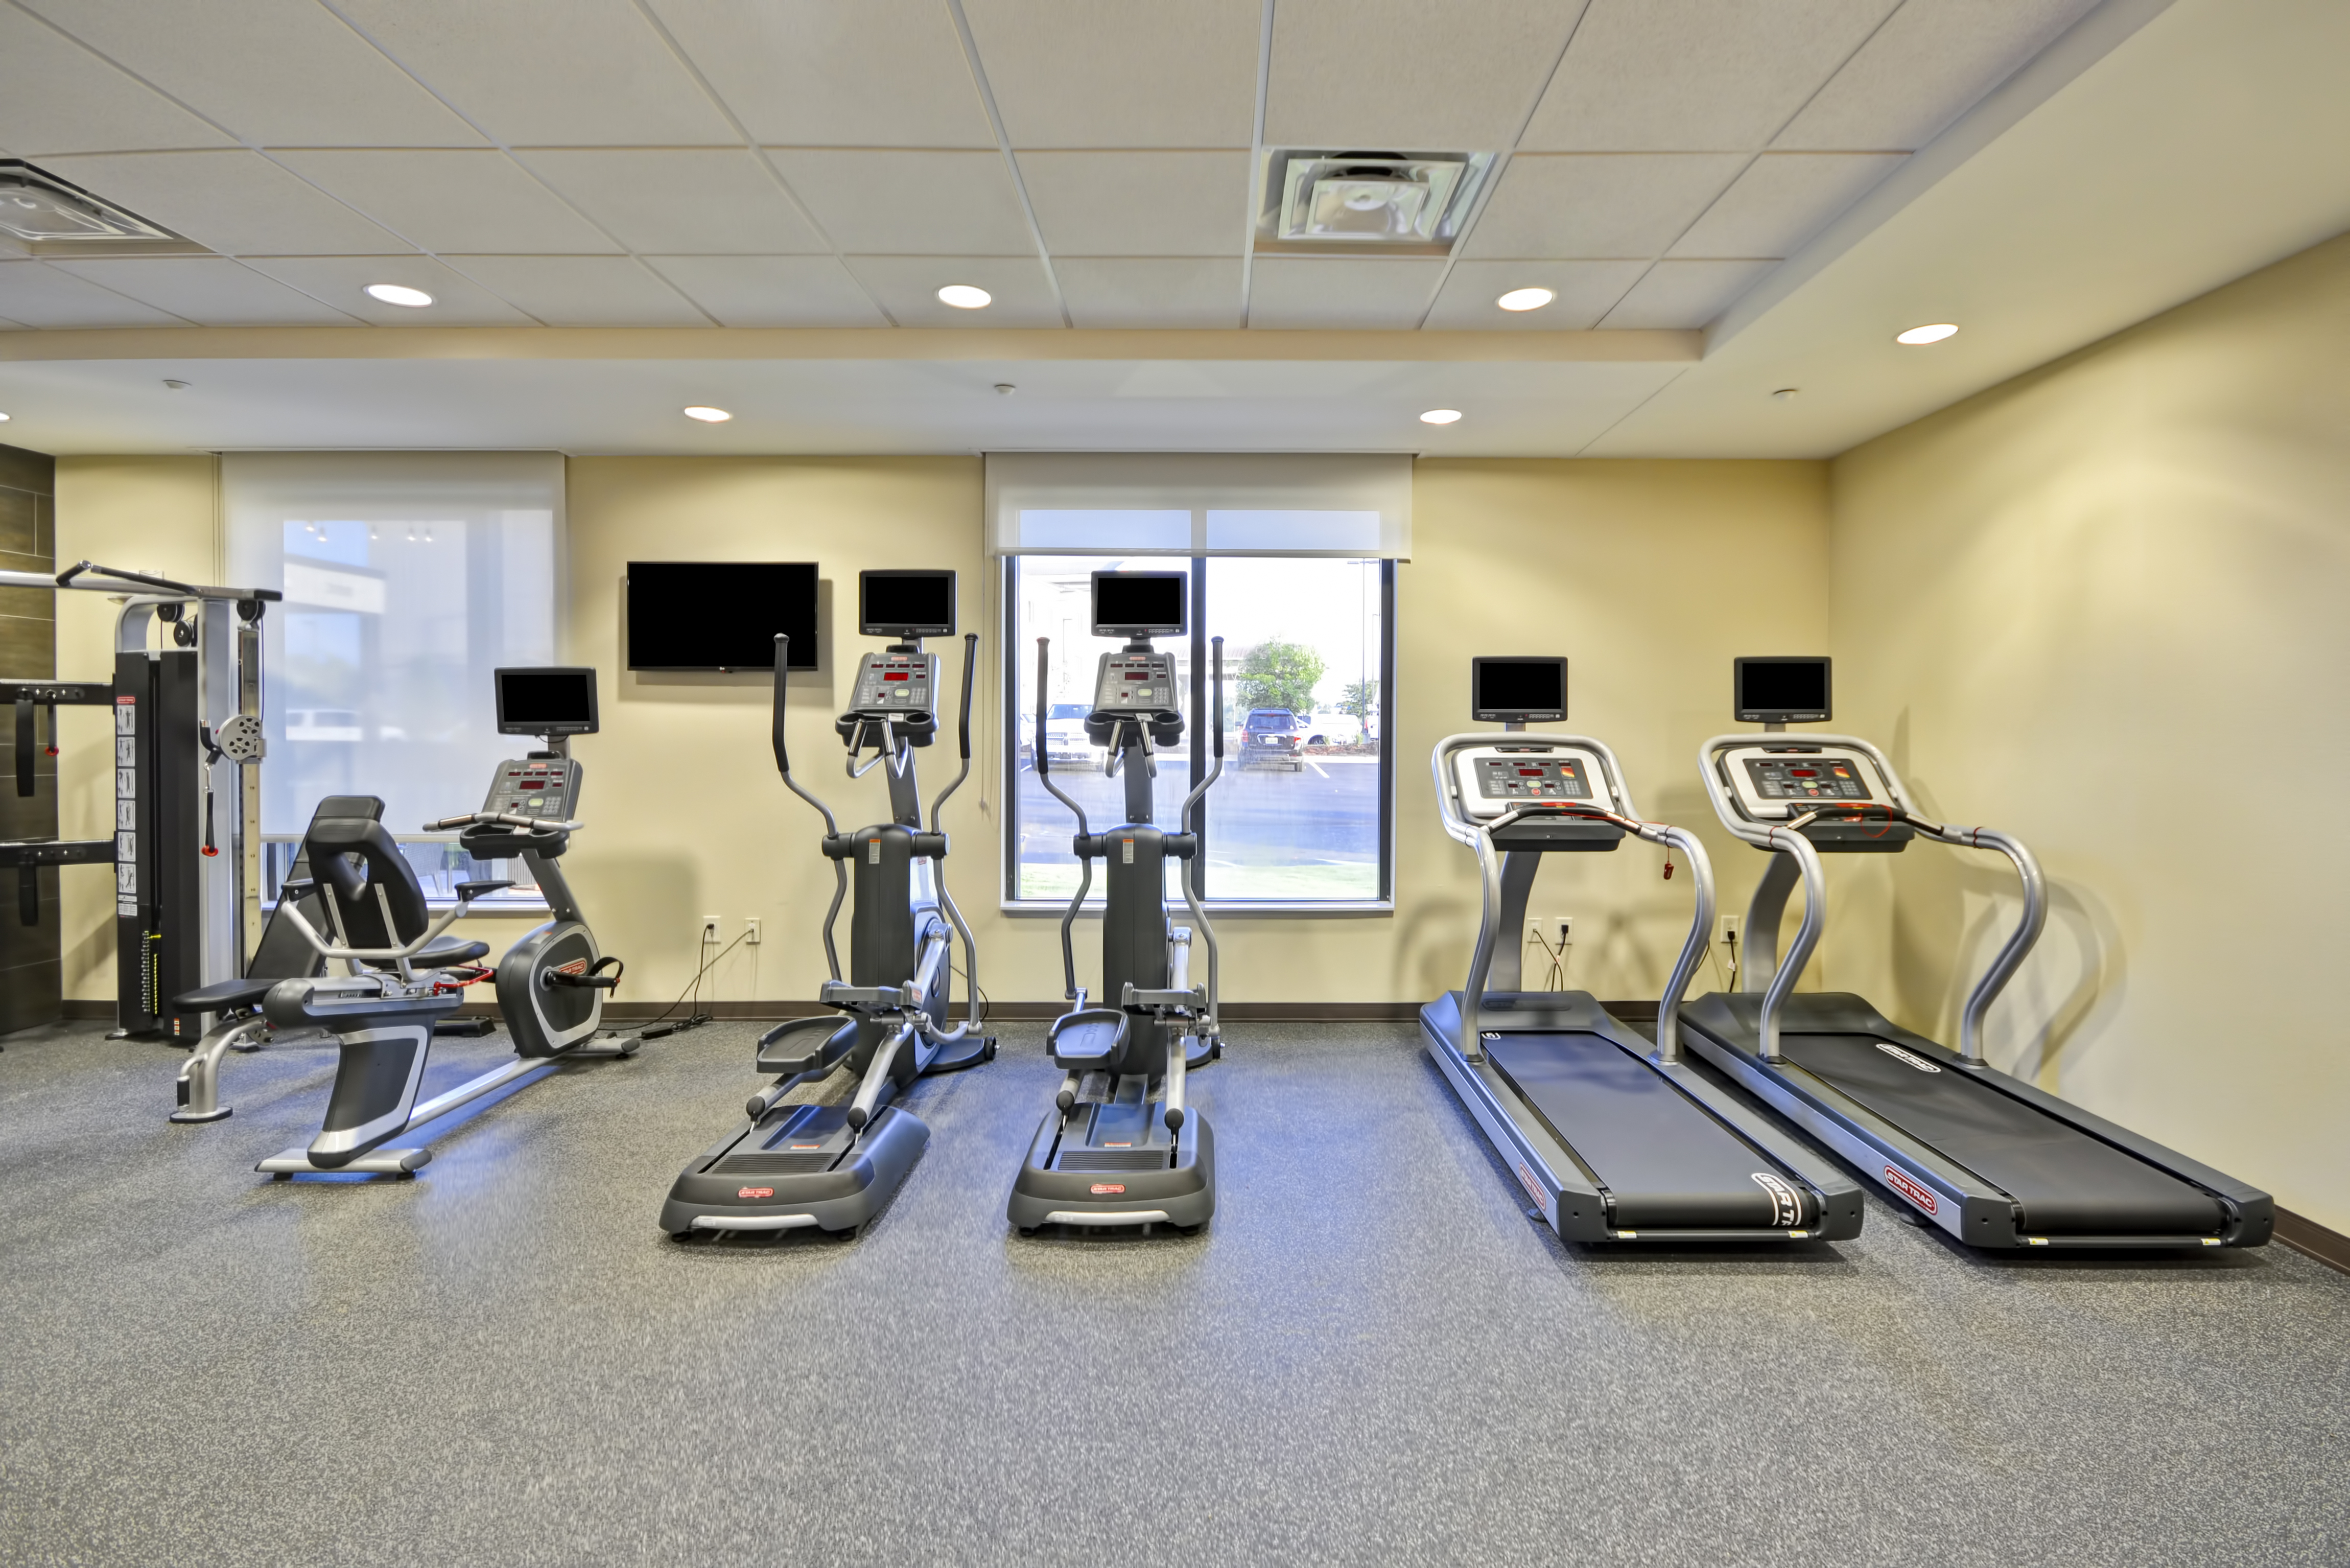 Home2 Suites by Hilton Opelika Auburn Hotel, AL - Spin2 Cycle